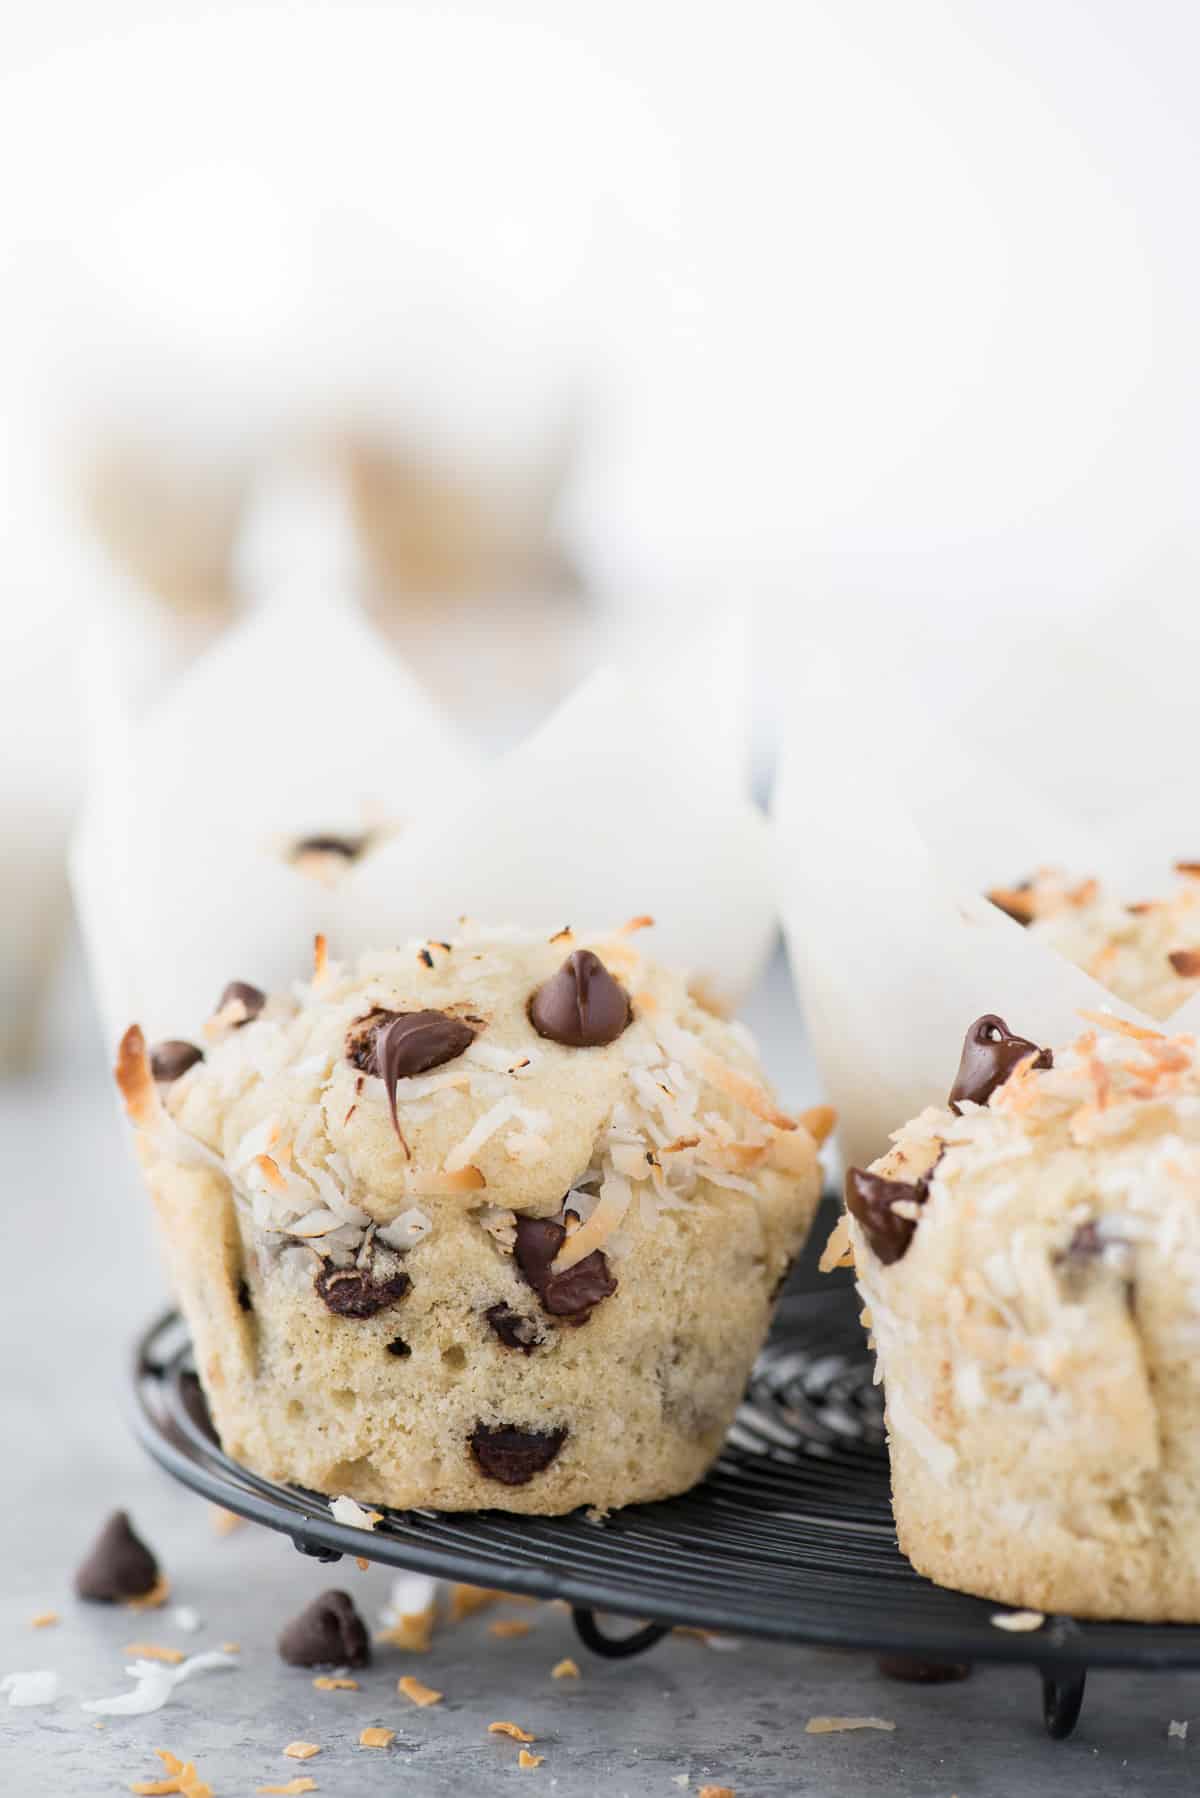 Coconut chocolate chip muffins on black wire cooling rack